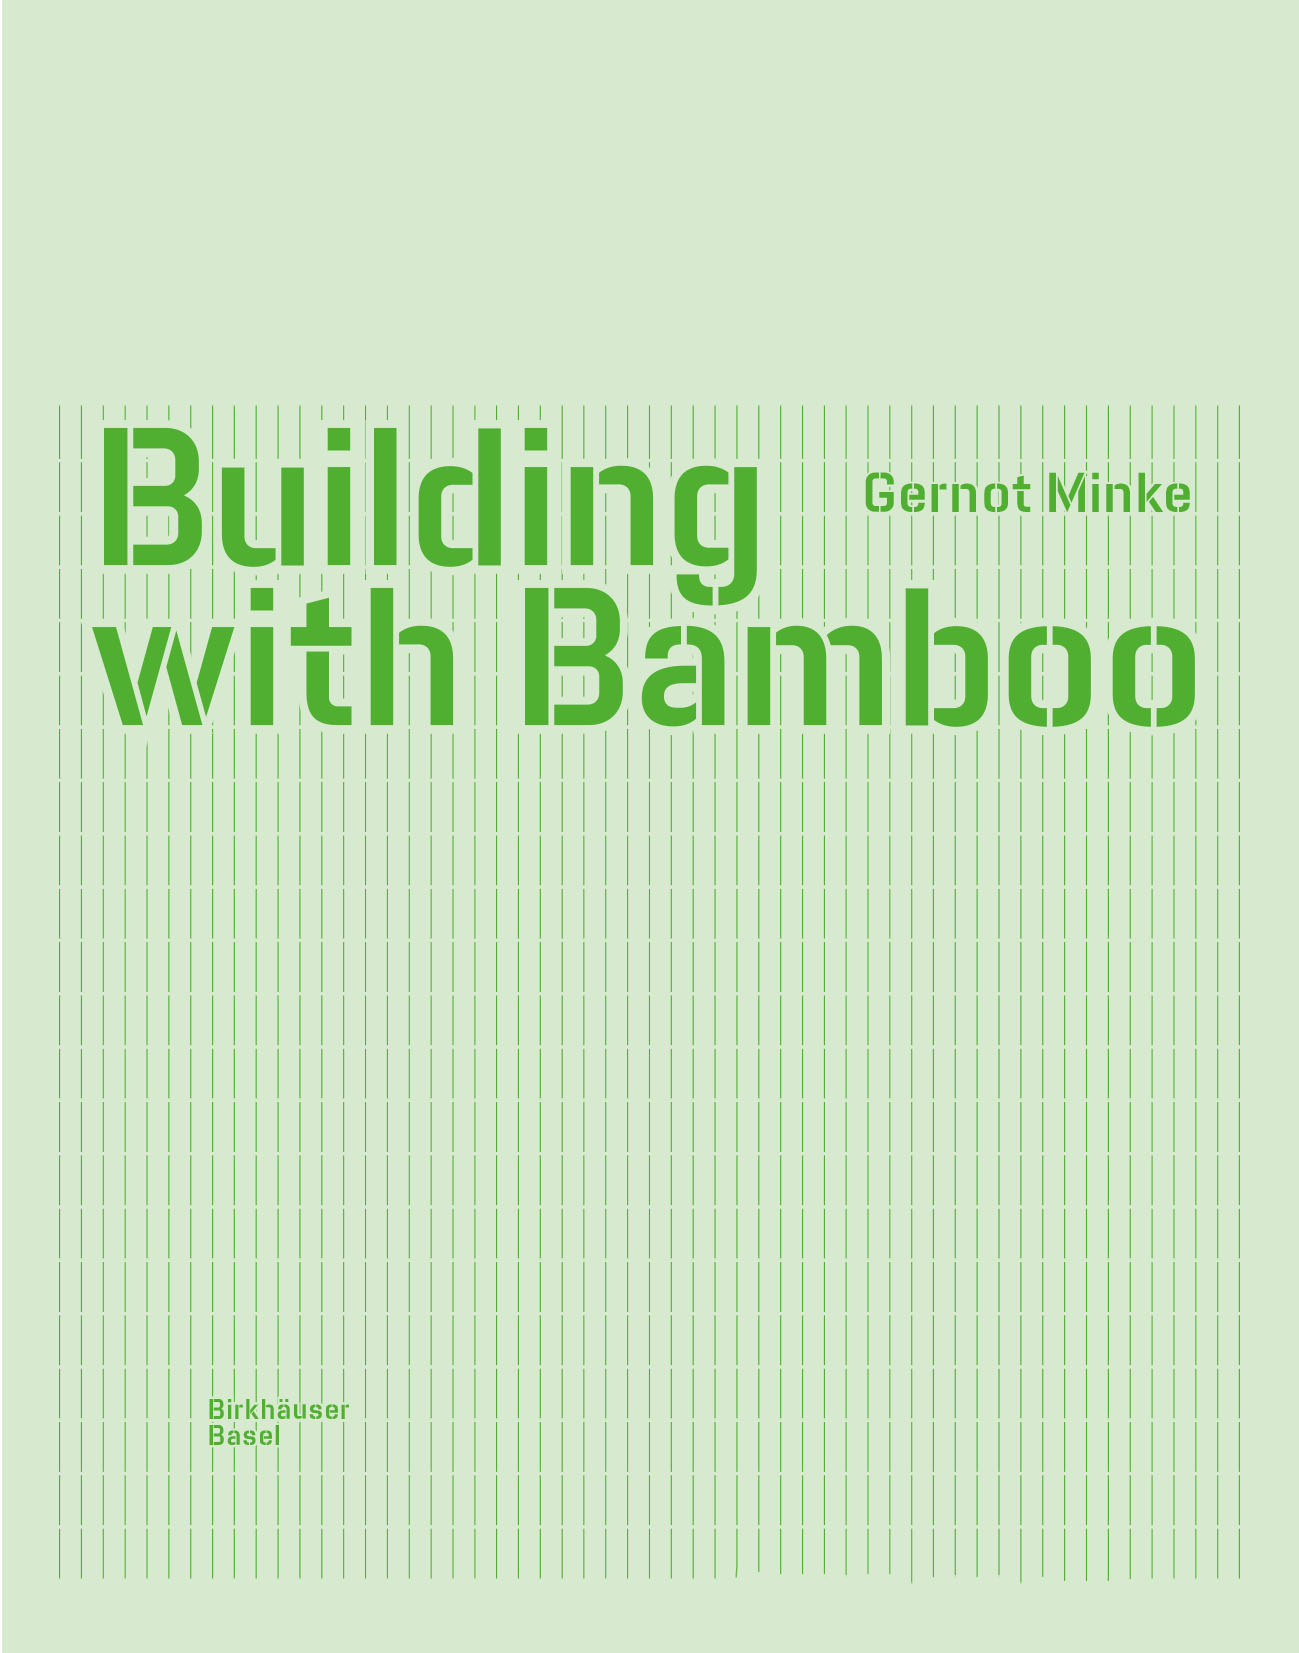 Introduction to Bamboo